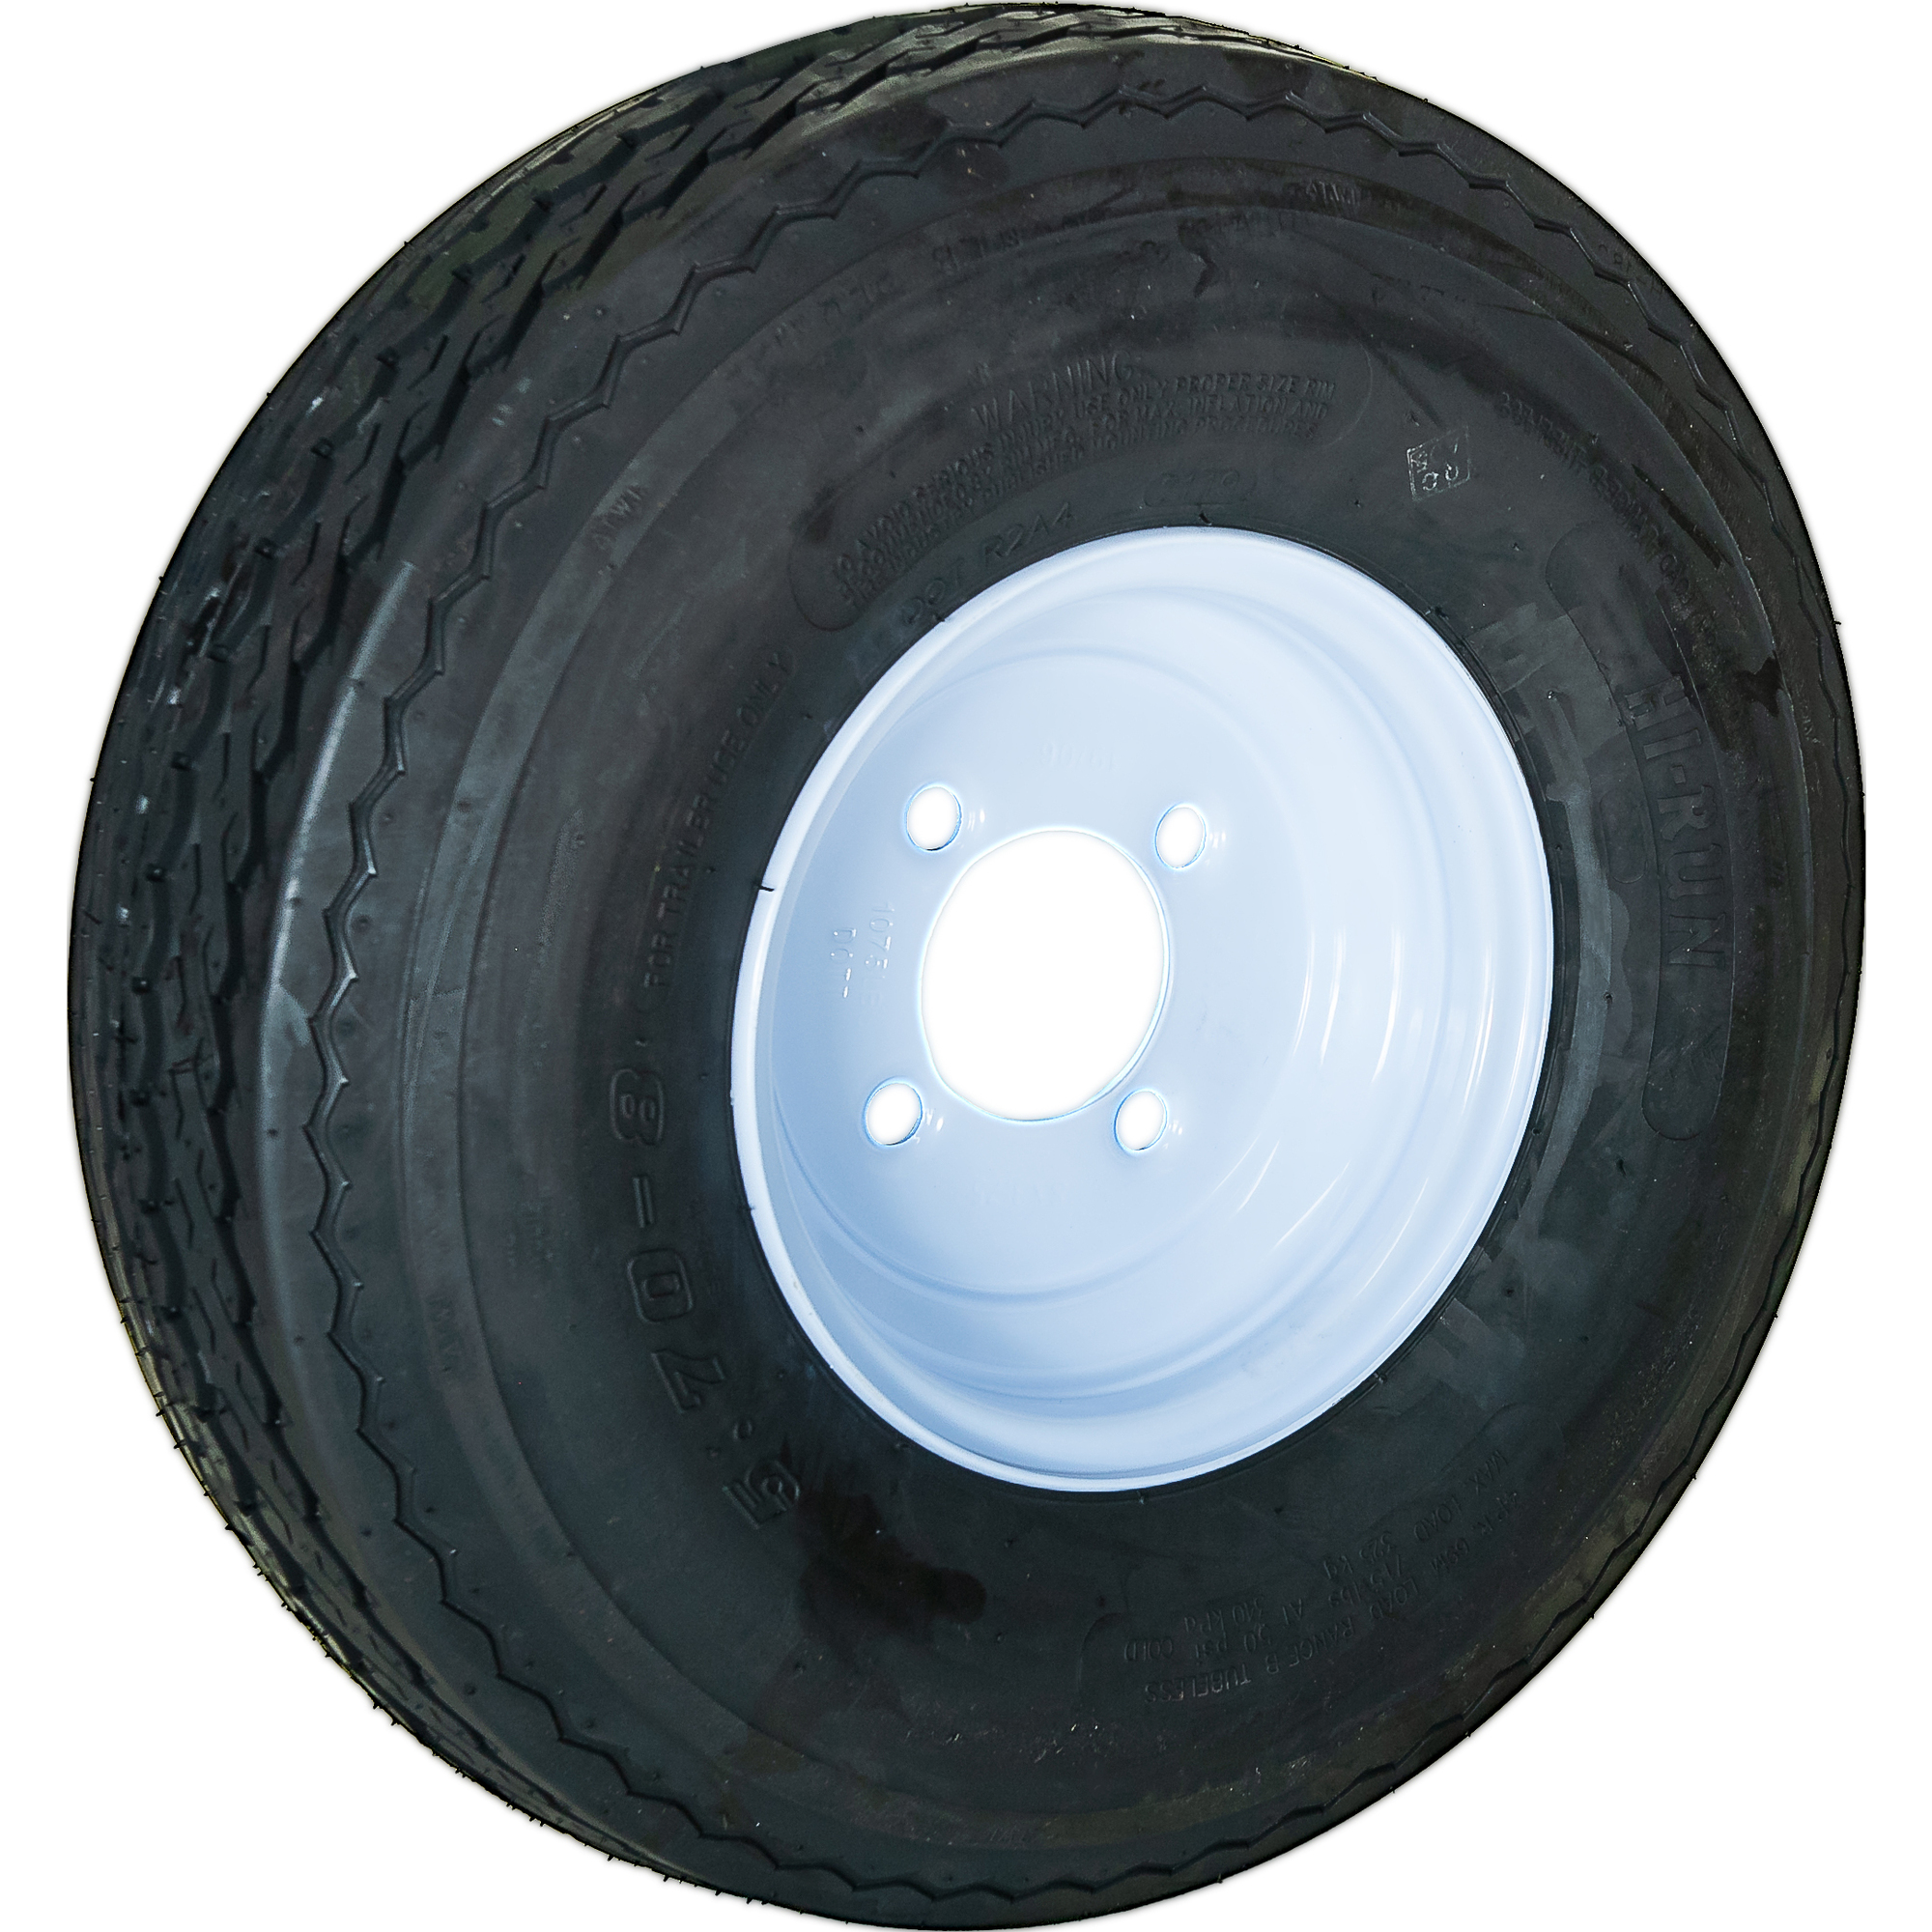 HI-RUN, Highway Trailer Tire Assembly, Bias-Ply, Tire Size 5.70-8 Load Range Rating C, Bolt Holes (qty.) 4 Model ASB1025